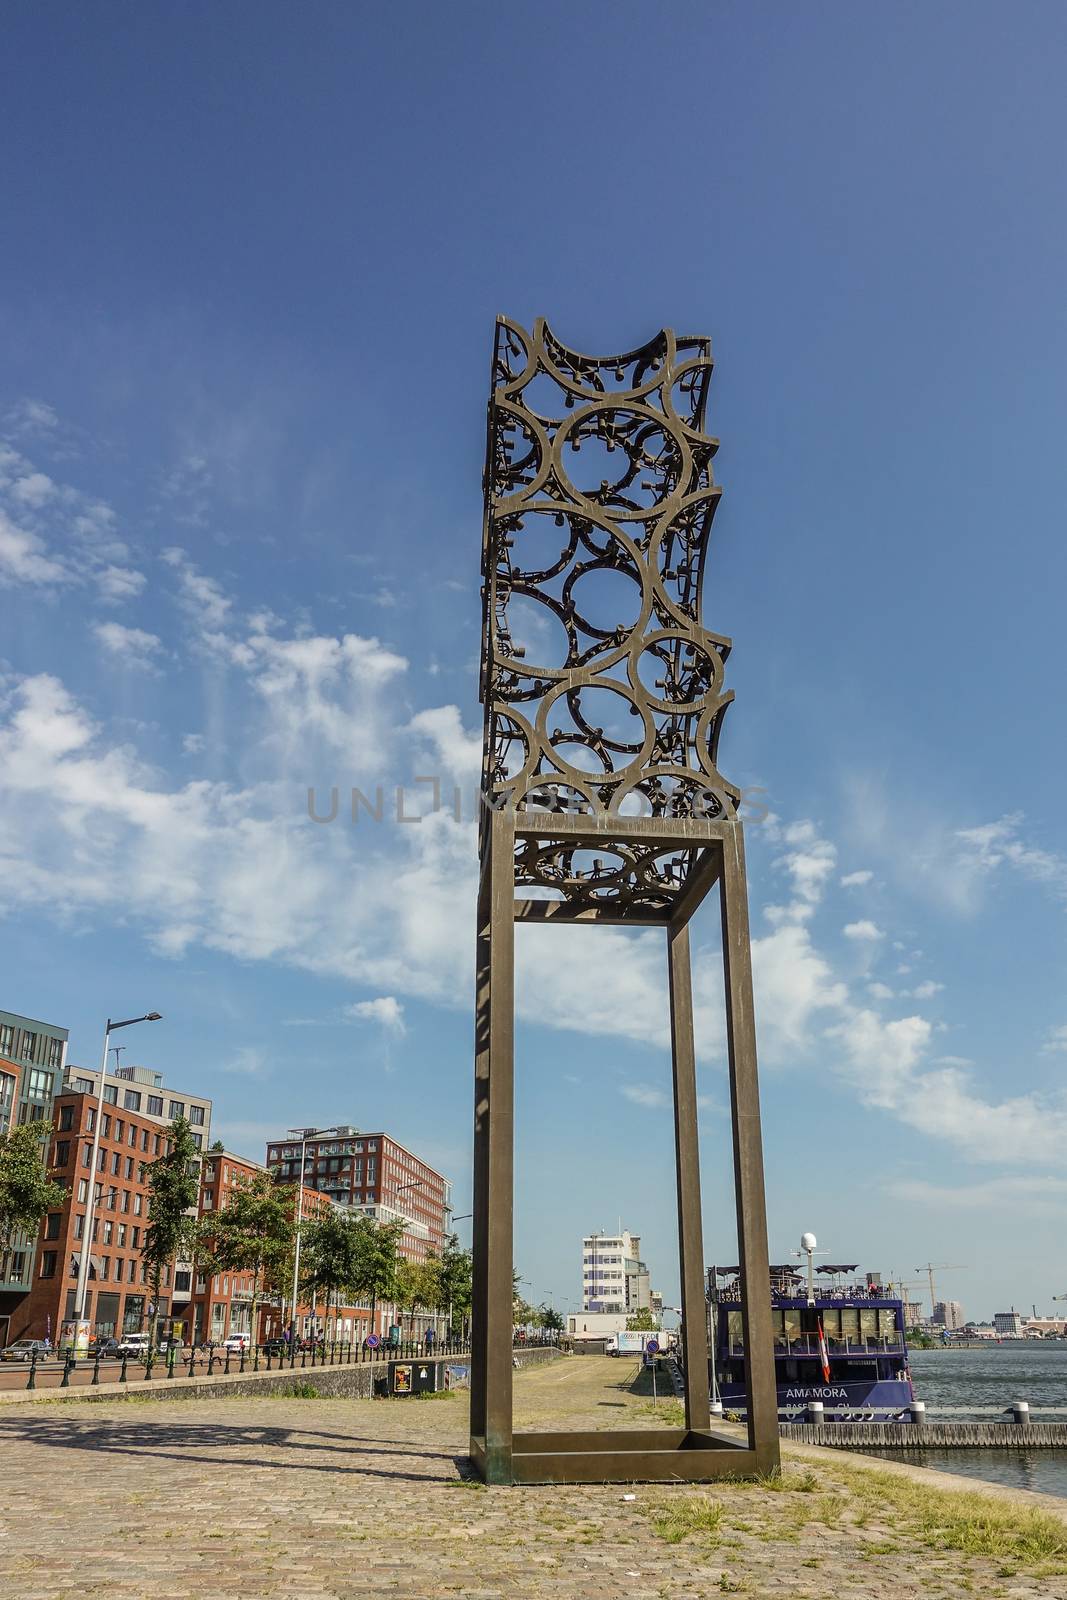 Amsterdam, the Netherlands - June 30, 2019: Tall rusted artwork, sculpture of metal circles welded together and set against blue sky with some white clouds on IJdok.